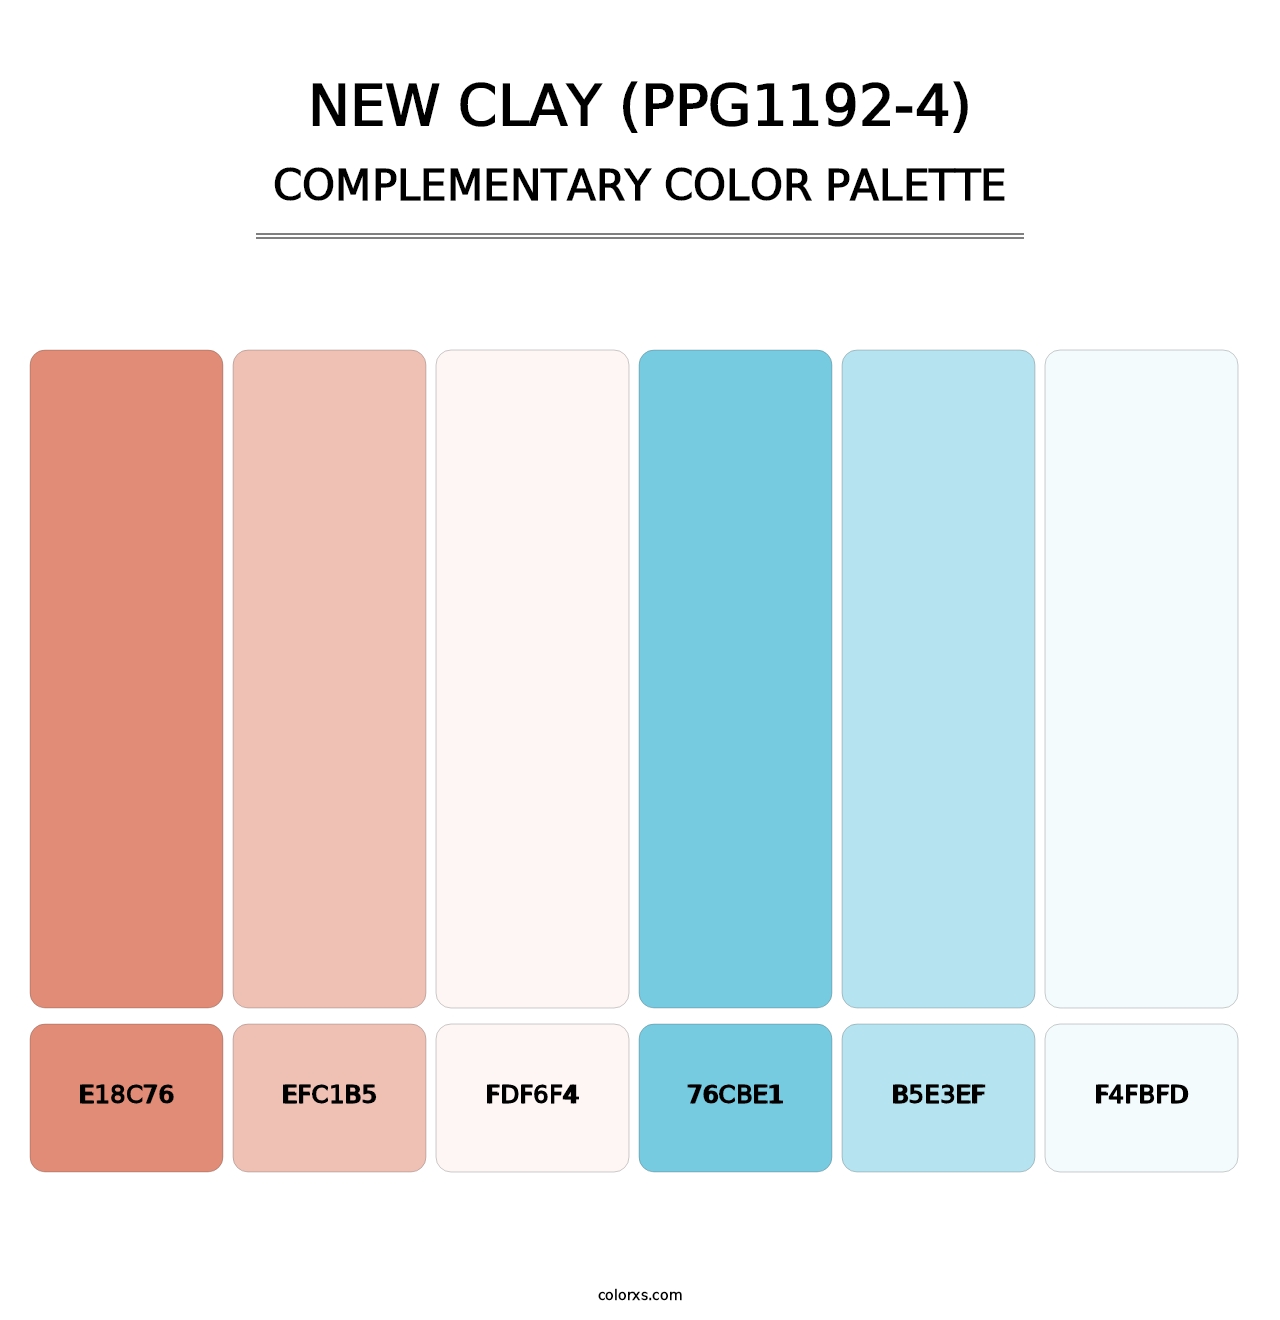 New Clay (PPG1192-4) - Complementary Color Palette